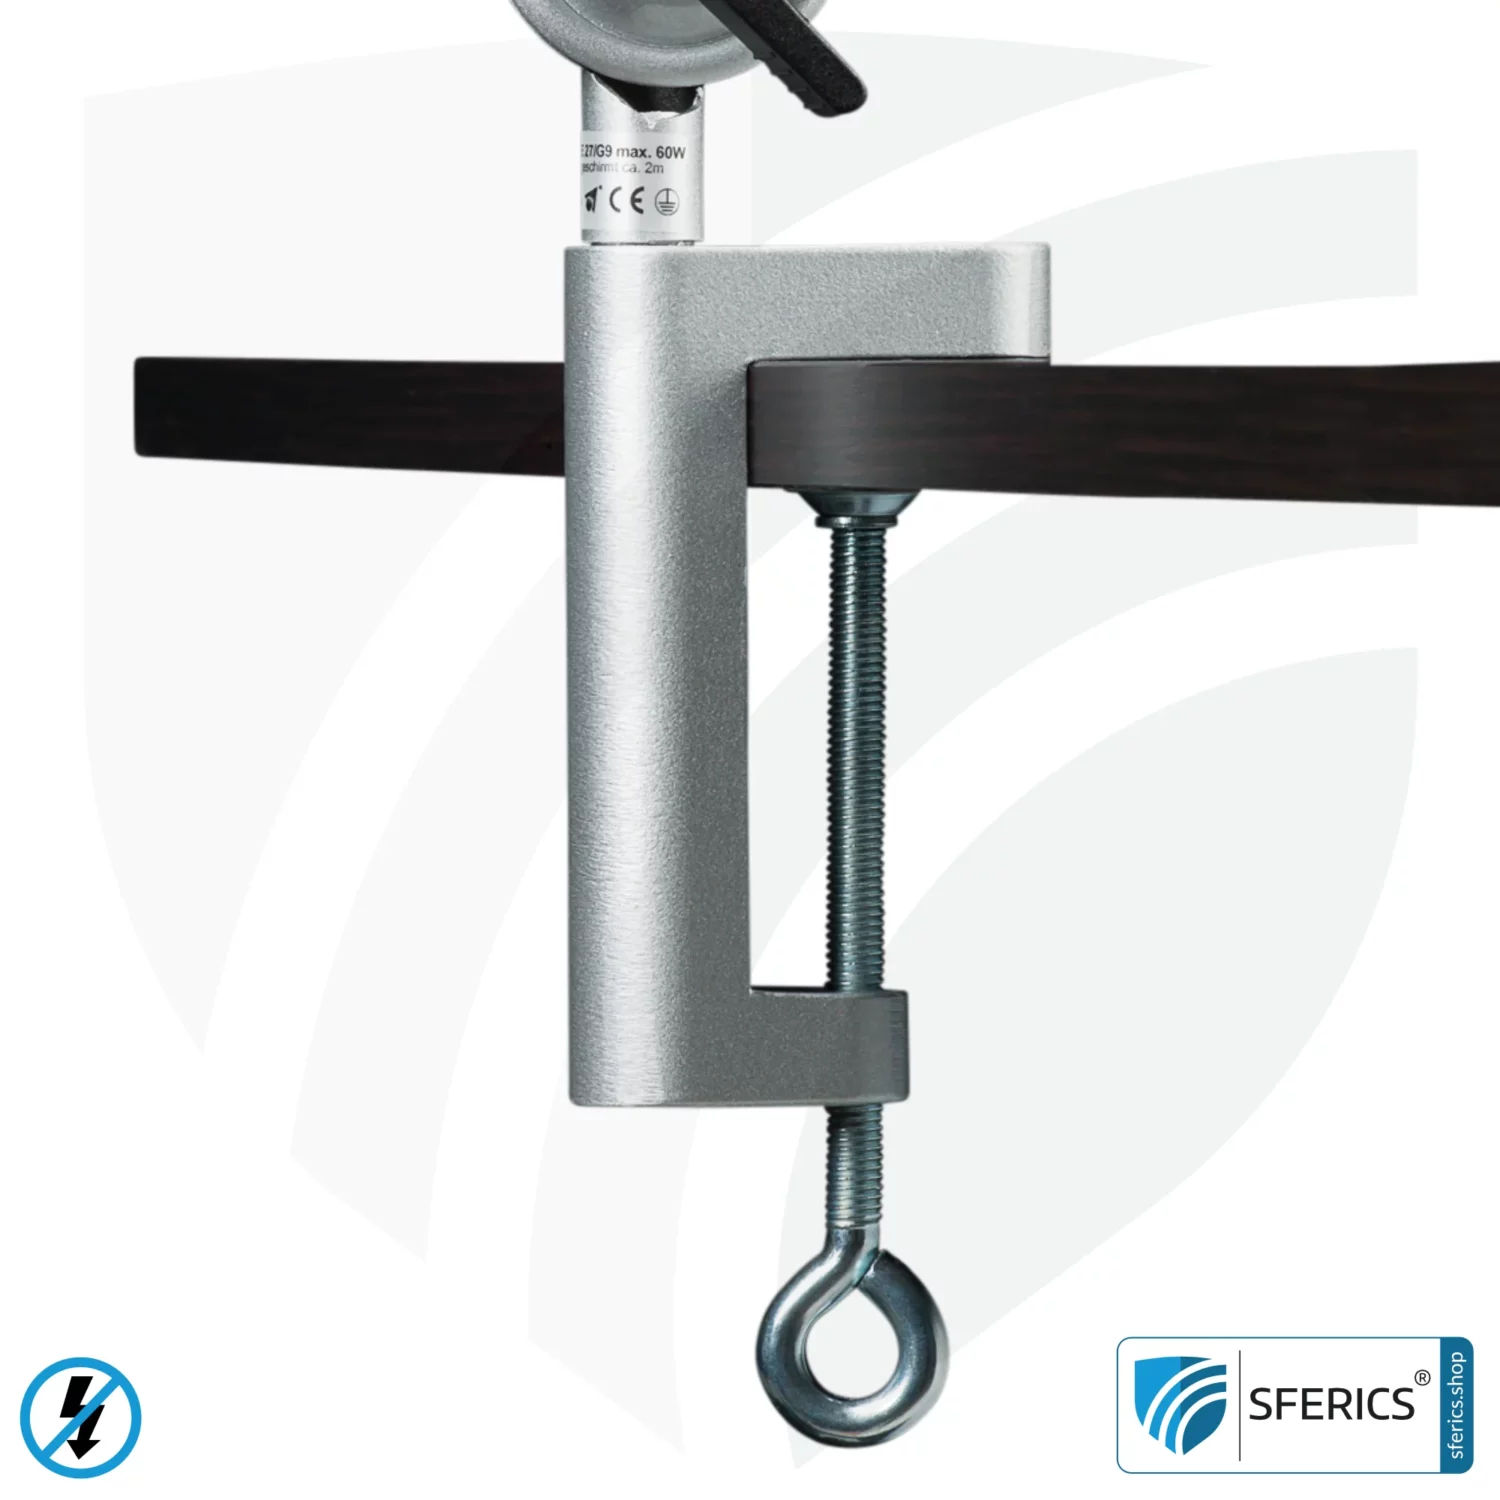 Clamping foot for shielded lamp fixation for desk, work station or workshop | design SILVER.